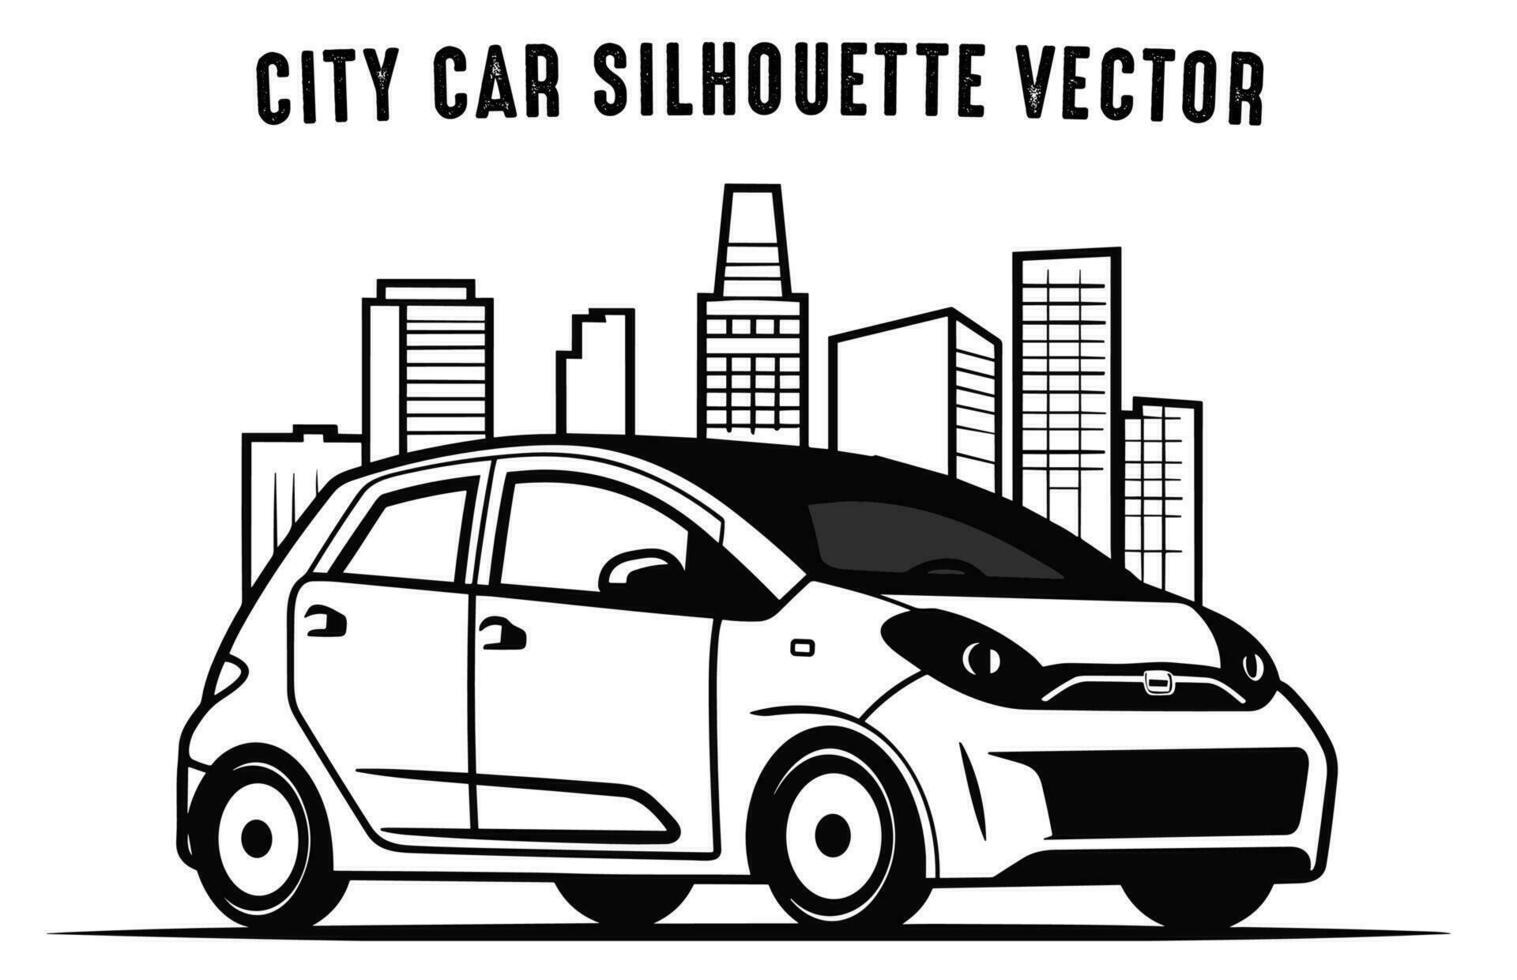 City Car outline Vector Silhouette isolated on a white background